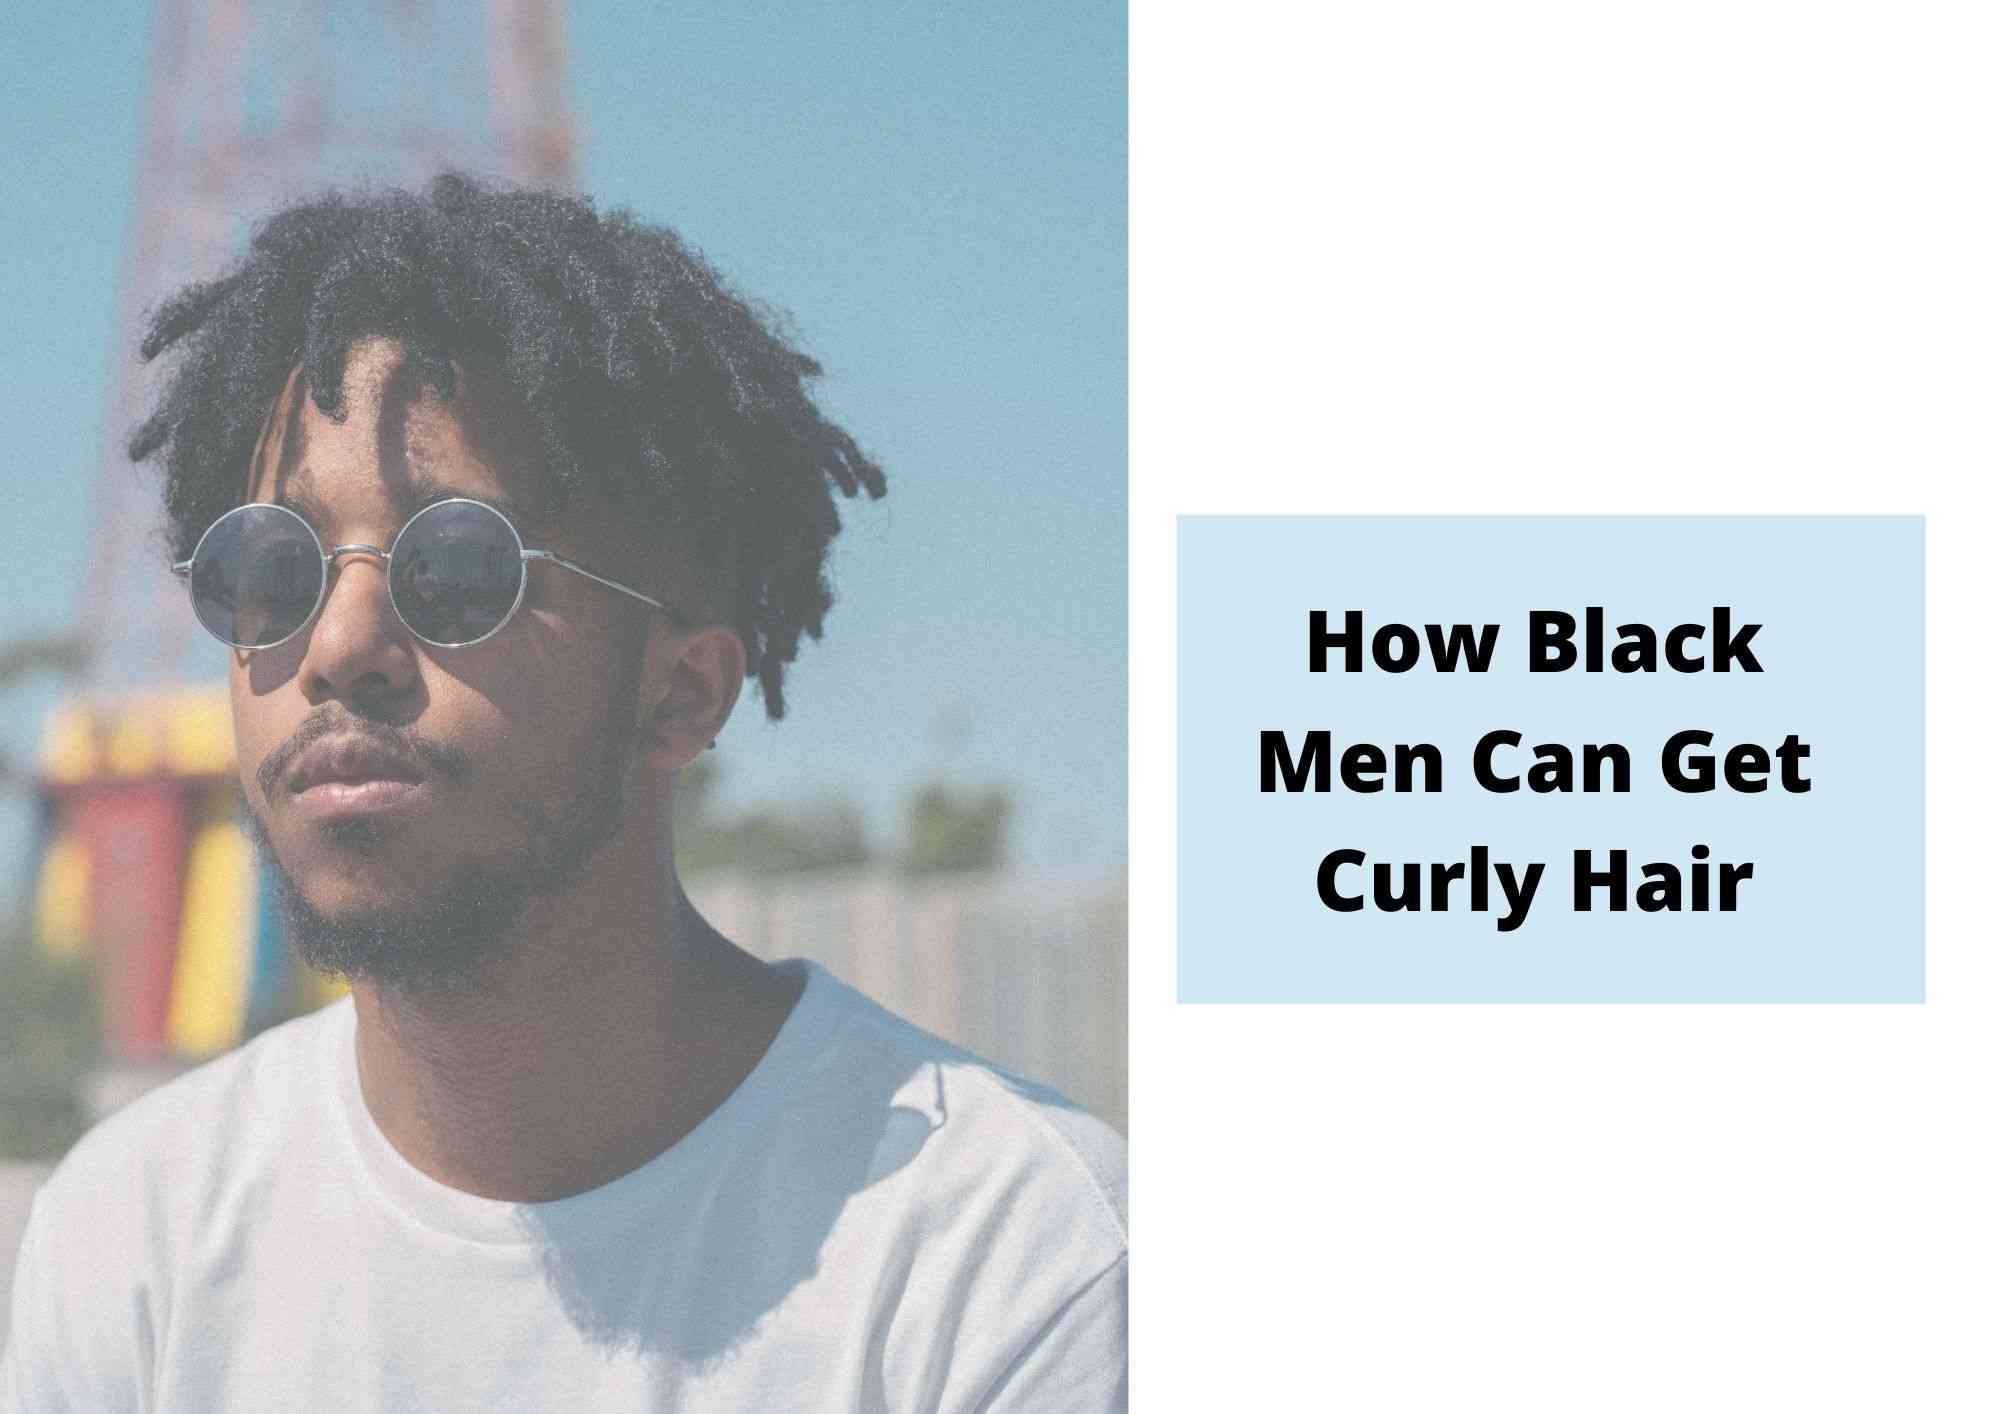 How To Get Curly Hair For Black Men In 9 Amazing, Quick Ways - Hair  Everyday Review